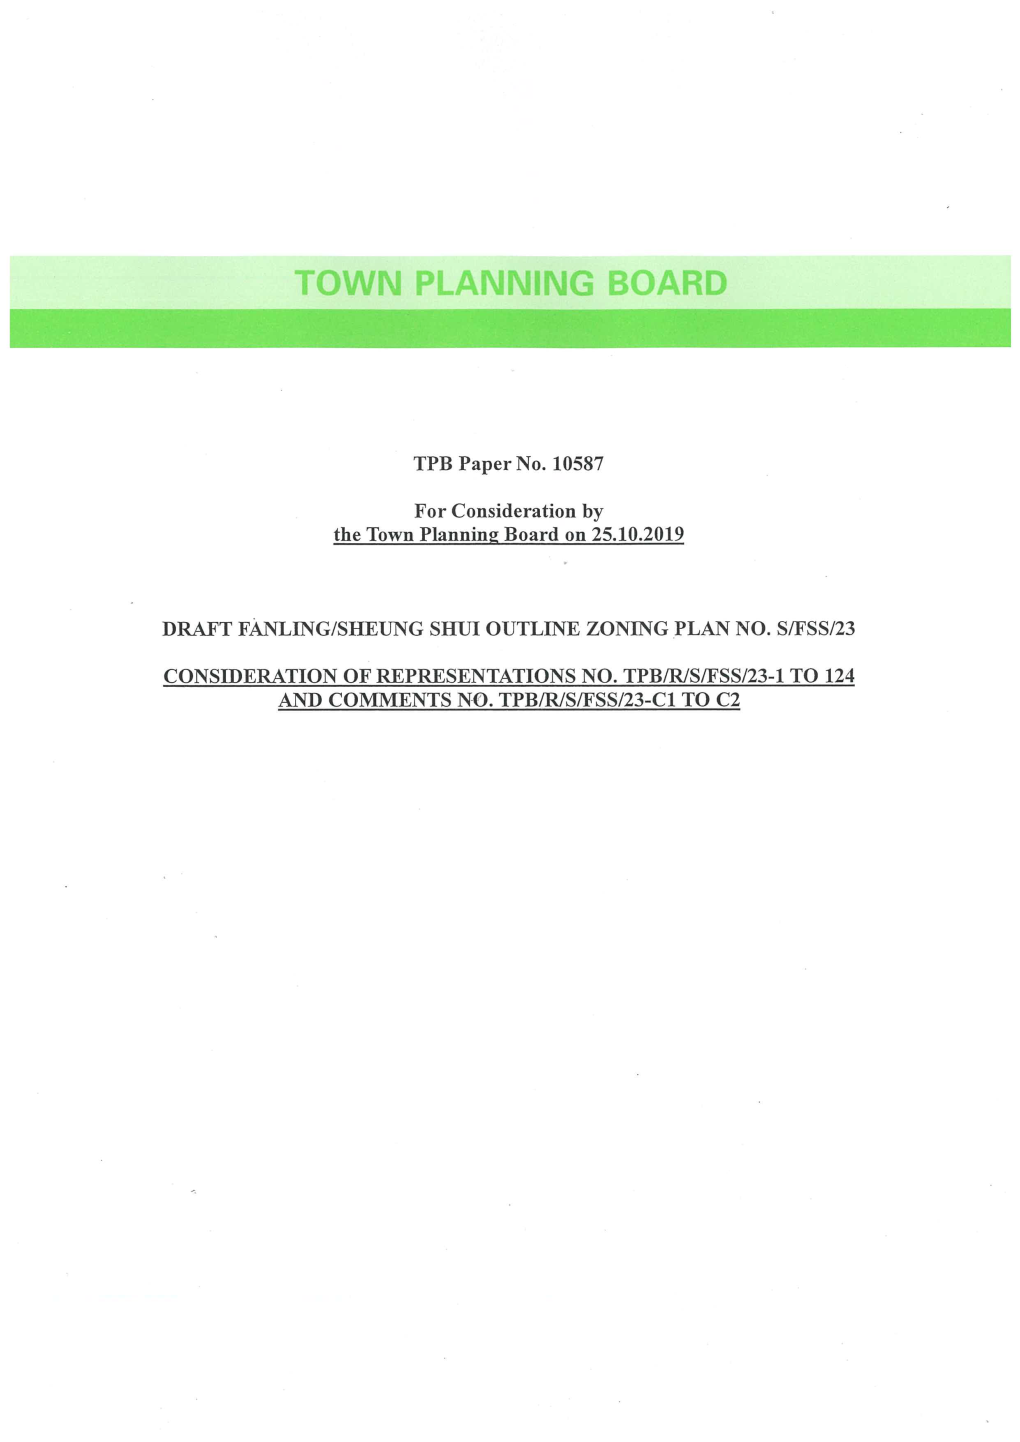 Town Planning Board Paper No.10587